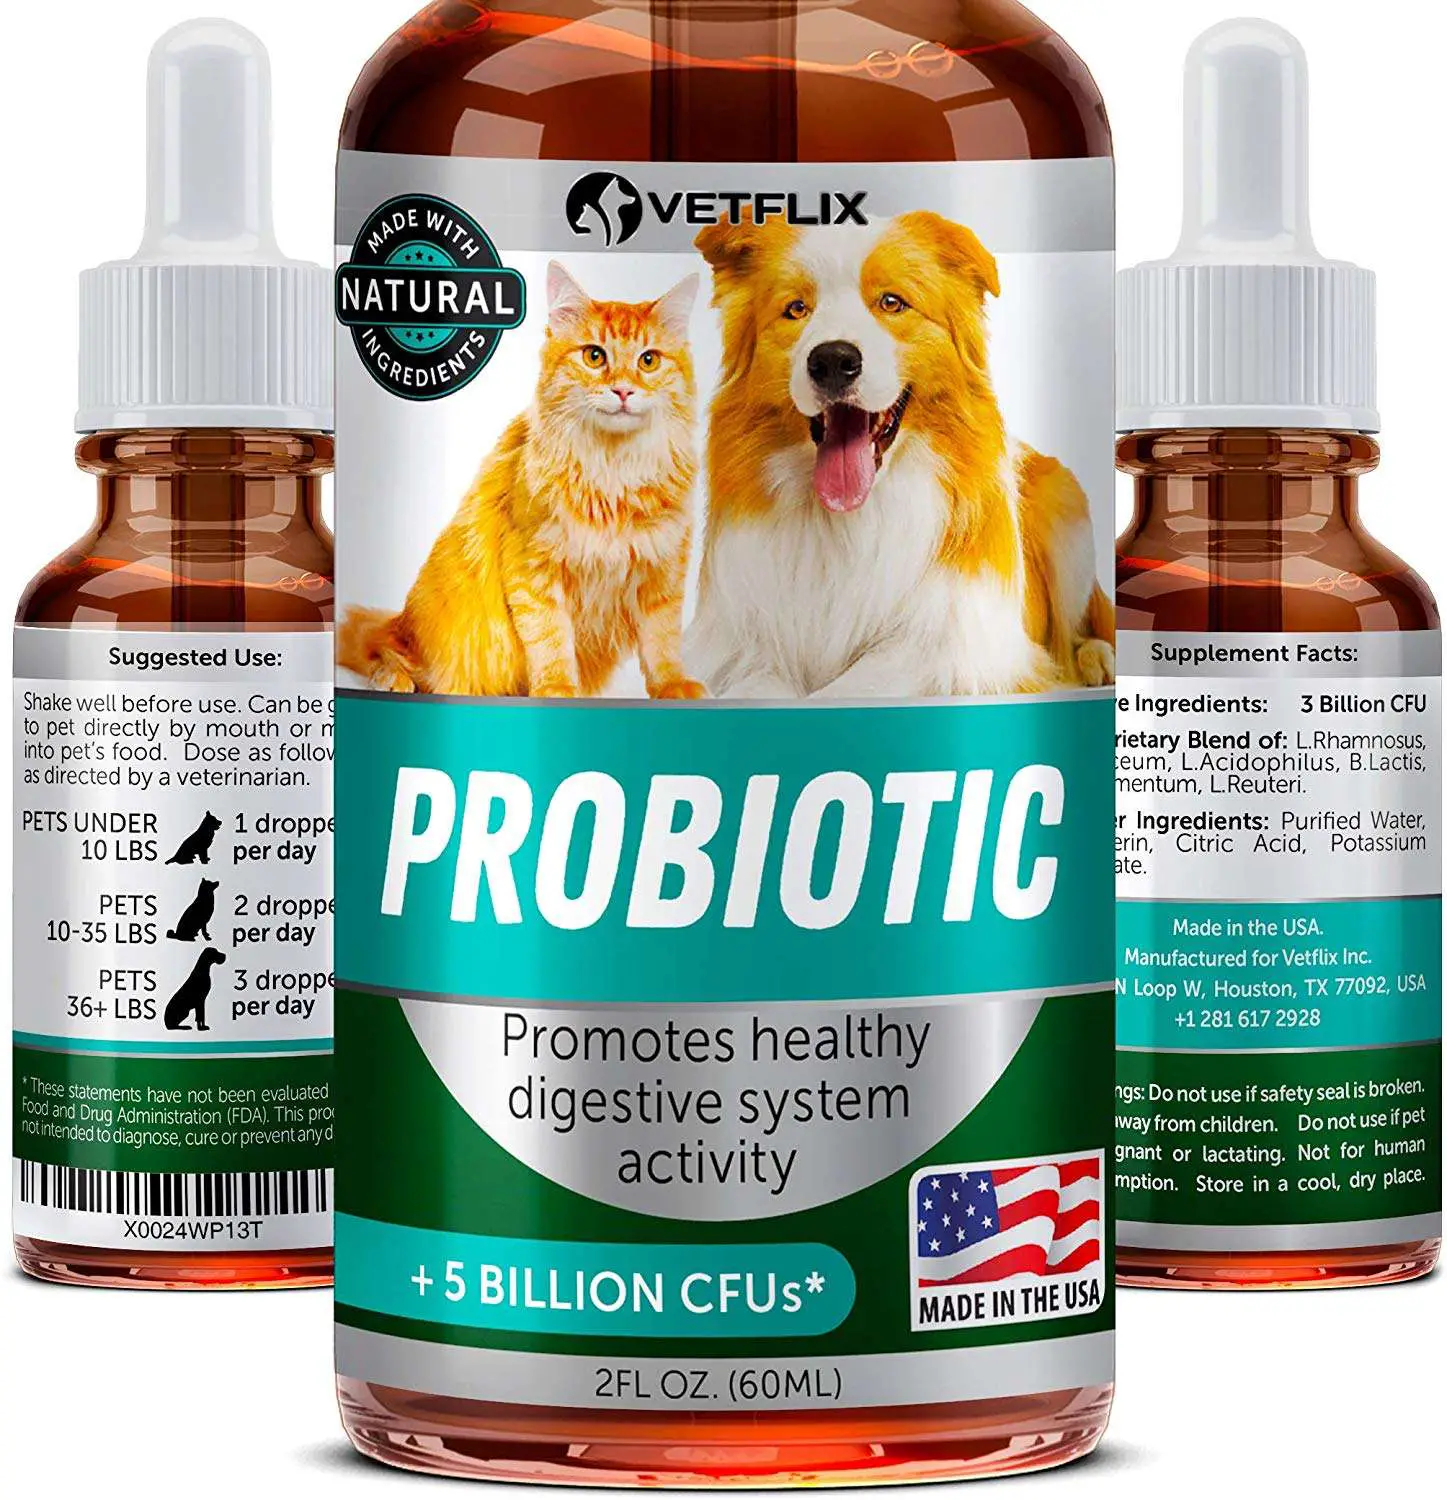 The 5 Best Probiotics for Cats of 2020 + Why They Are ...